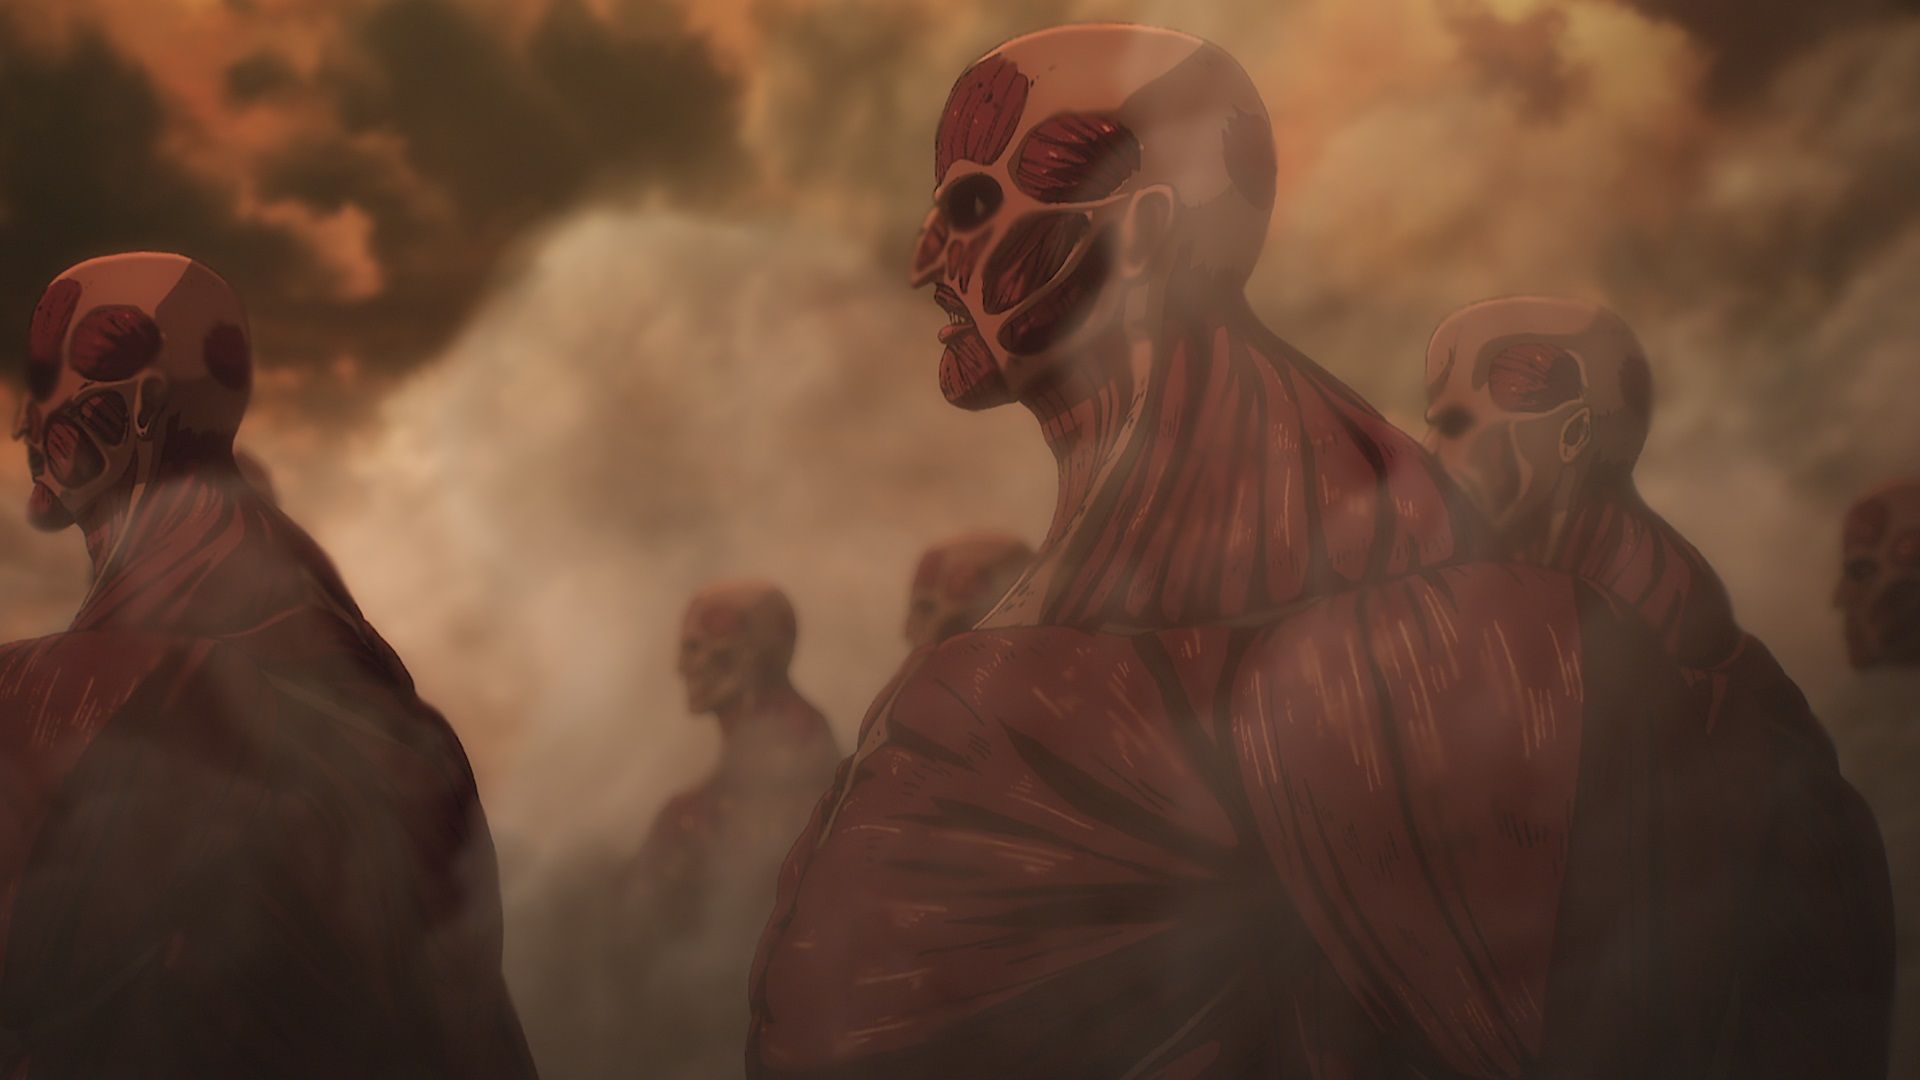 Attack on Titan' Season 4 Part 2 Episode 12 release date, time, trailer,  and plot for The Dawn of Humanity